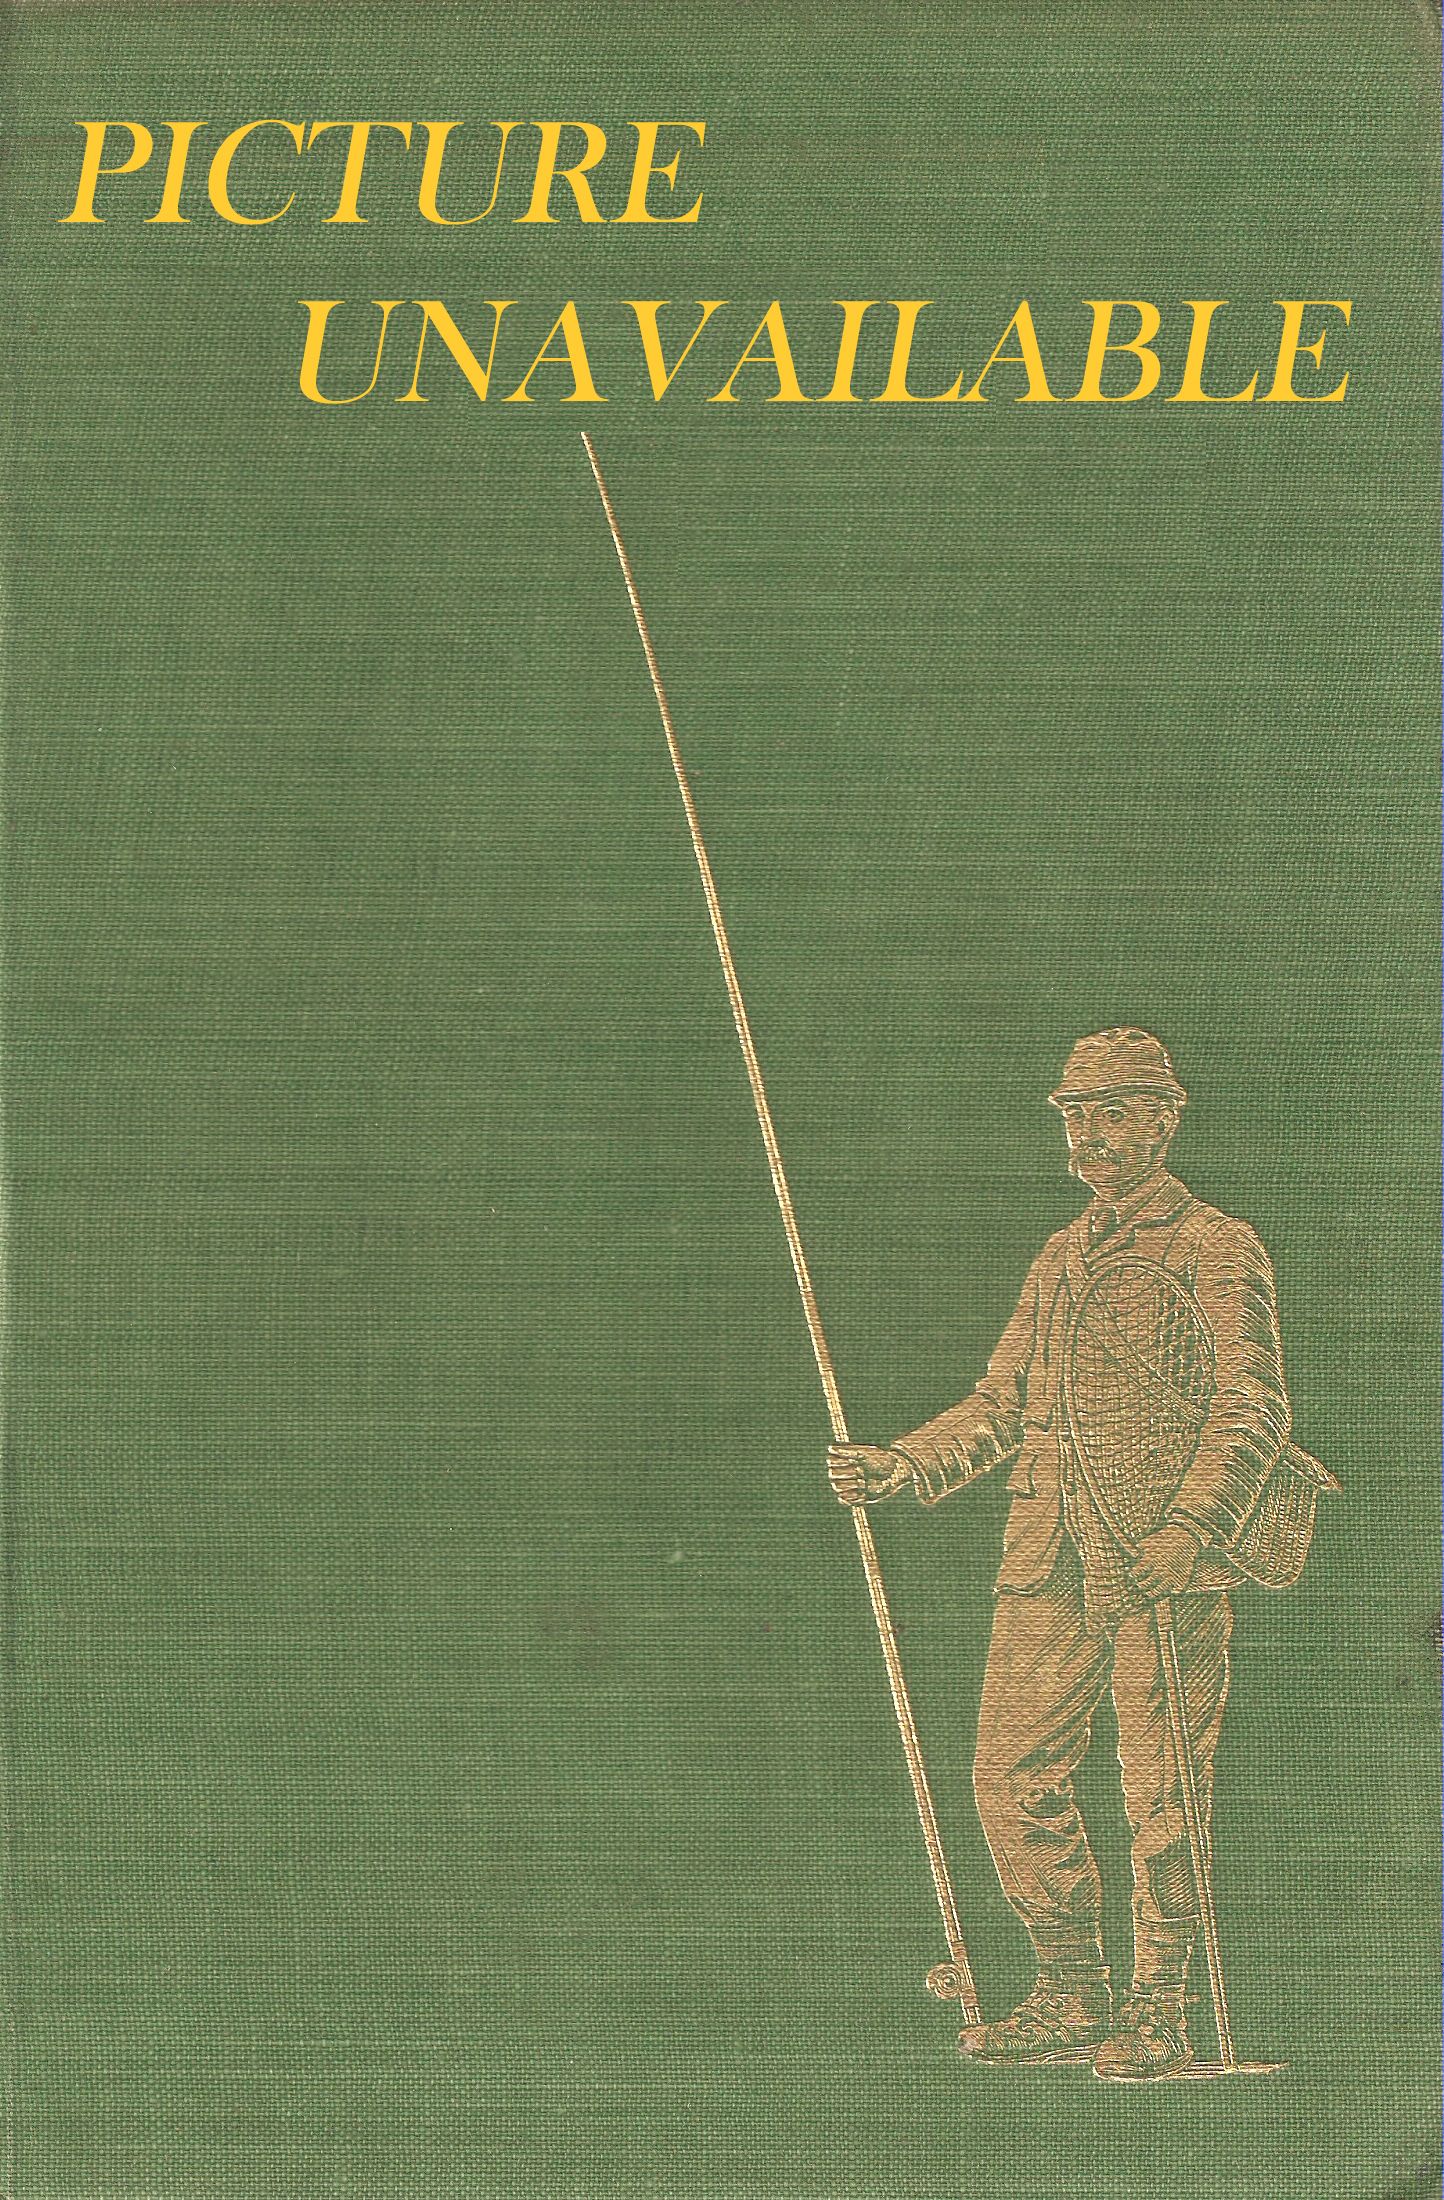 SALMON FISHING WITH THE FLY: ALSO A FEW NOTES ON FLY FISHING FOR SEA  TROUT. By John P. Traherne. De luxe leather-bound edition.